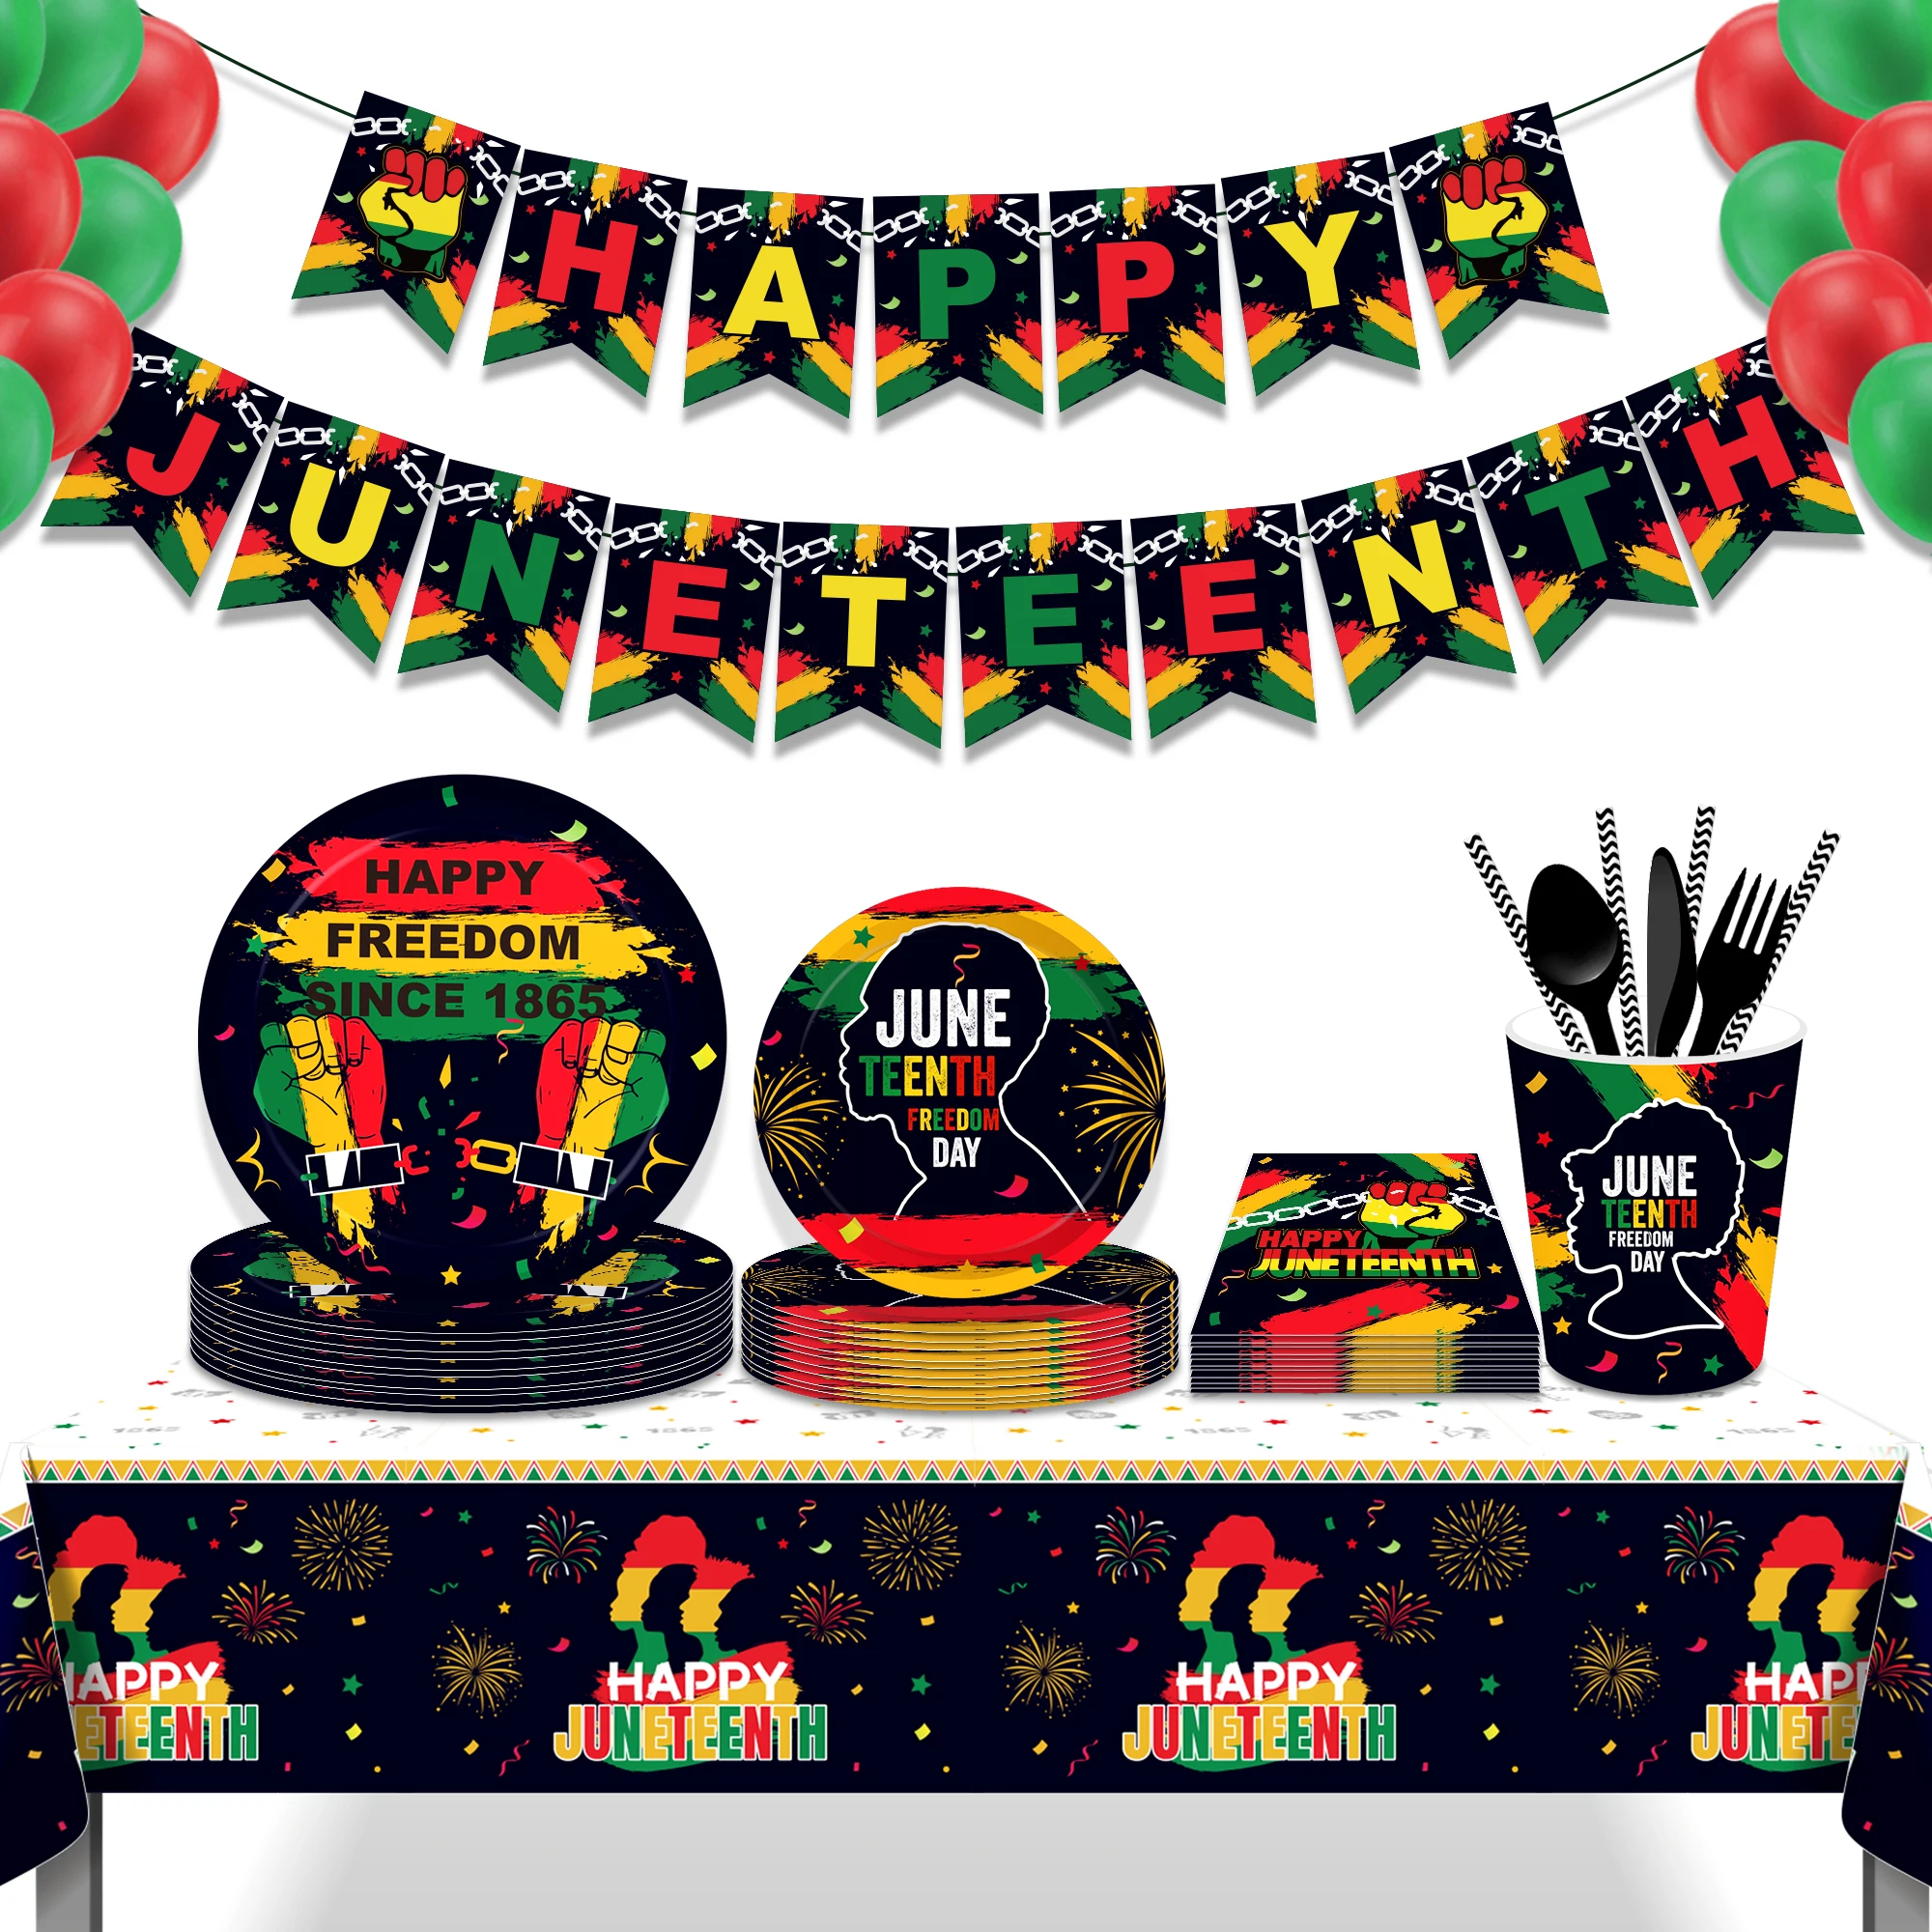 Black 1865 Happy Juneteenth Day Freedom Party Disposable Tableware Sets Plates Tablecovers Photo Props Black Month Day Supplies